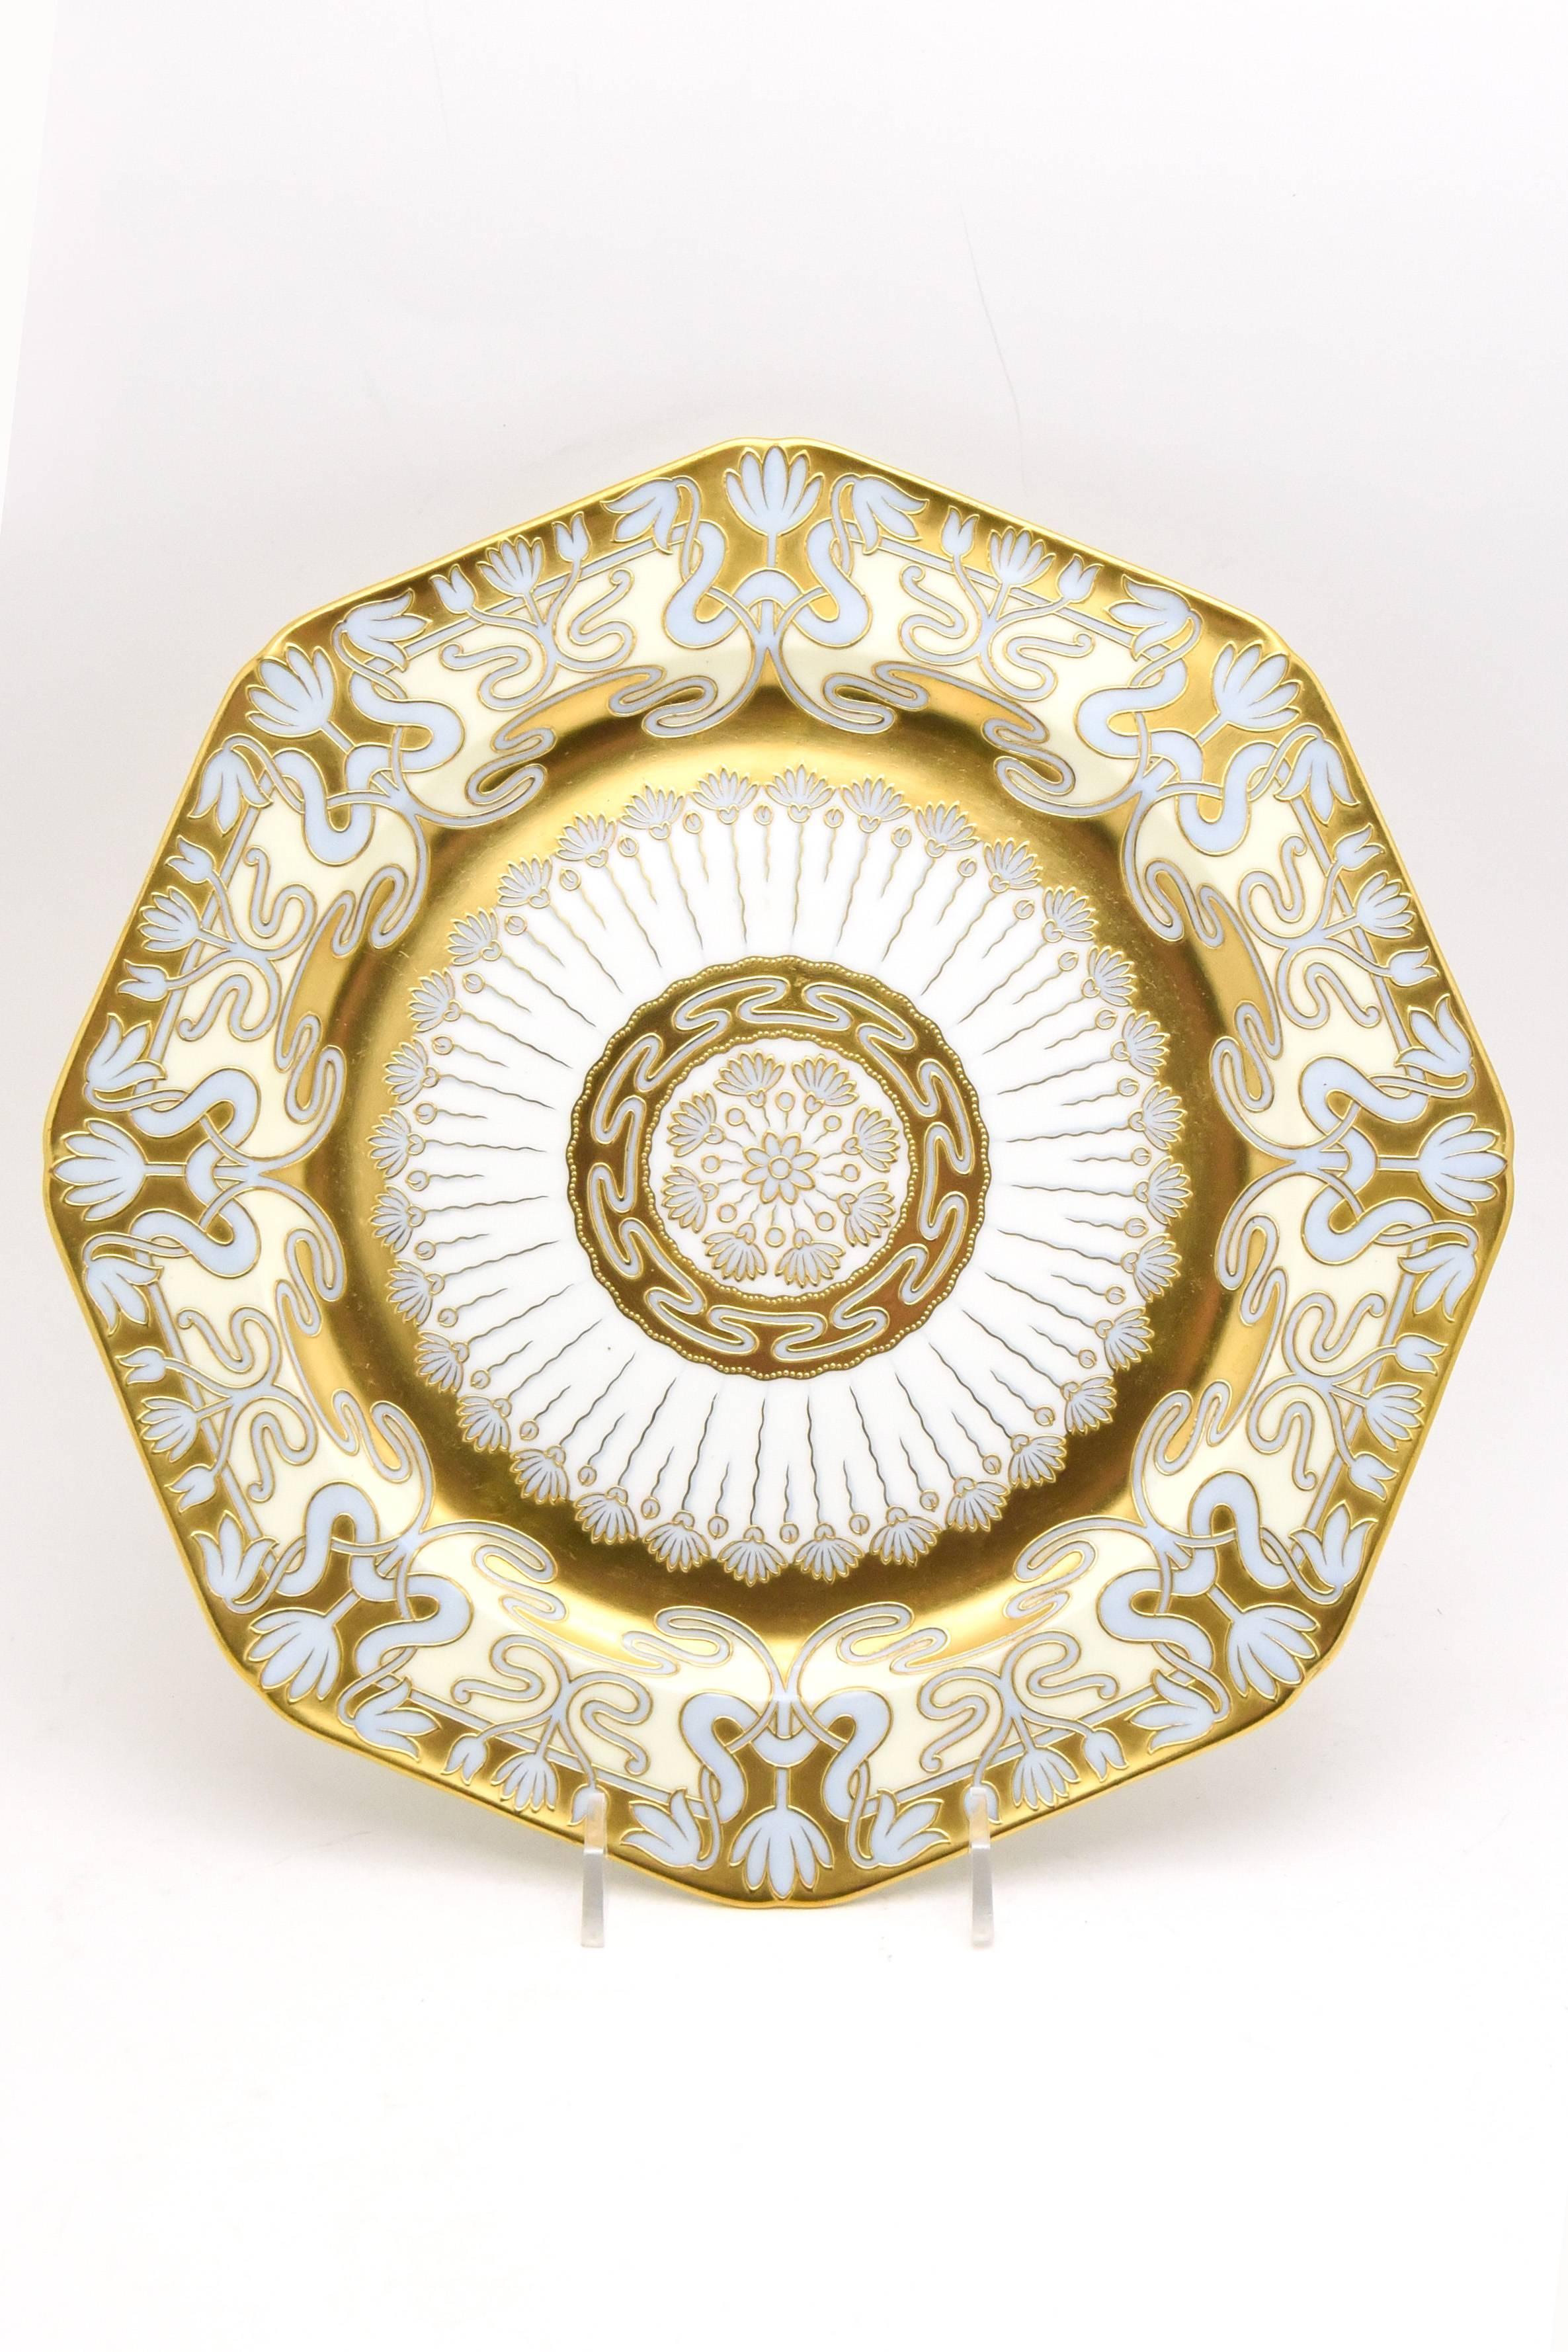 This is a very rare set of 12 Cauldon service/presentation plates showcasing Art Nouveau decoration at it's finest. Hand-painted raised paste gold over robin's egg blue creates a soft and elegant contrast to the flowing lines of the gold decoration.